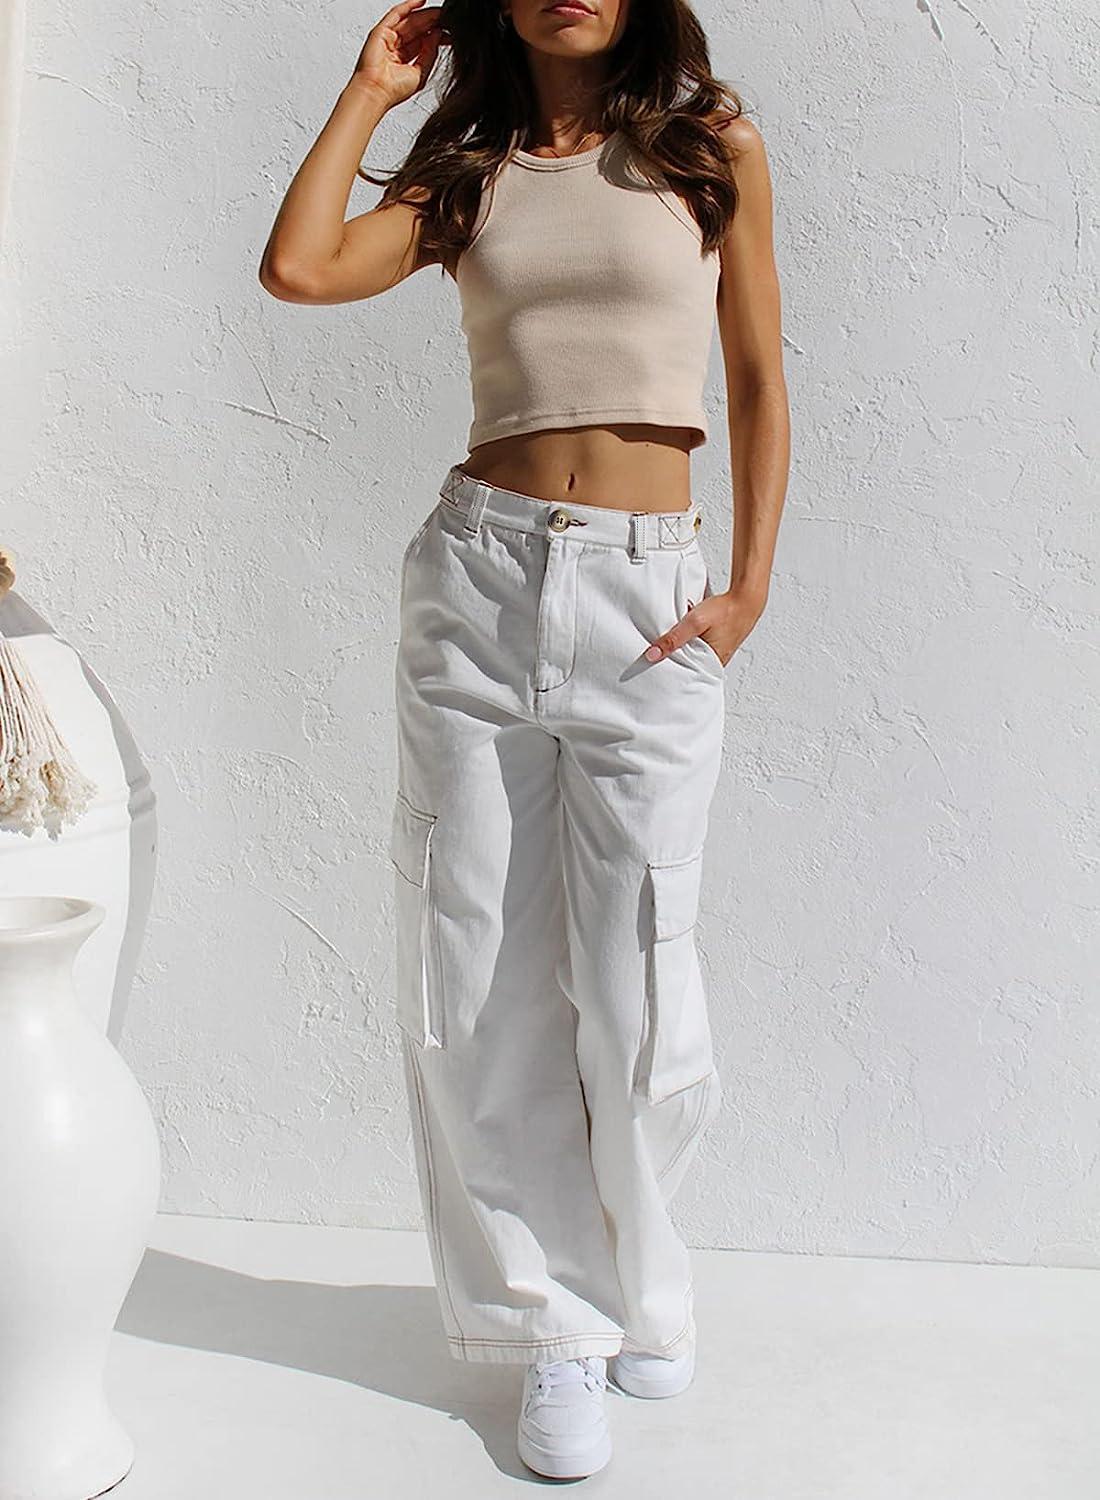 EVALESS Cargo Pants Women Casual Loose High Waisted Straight Leg